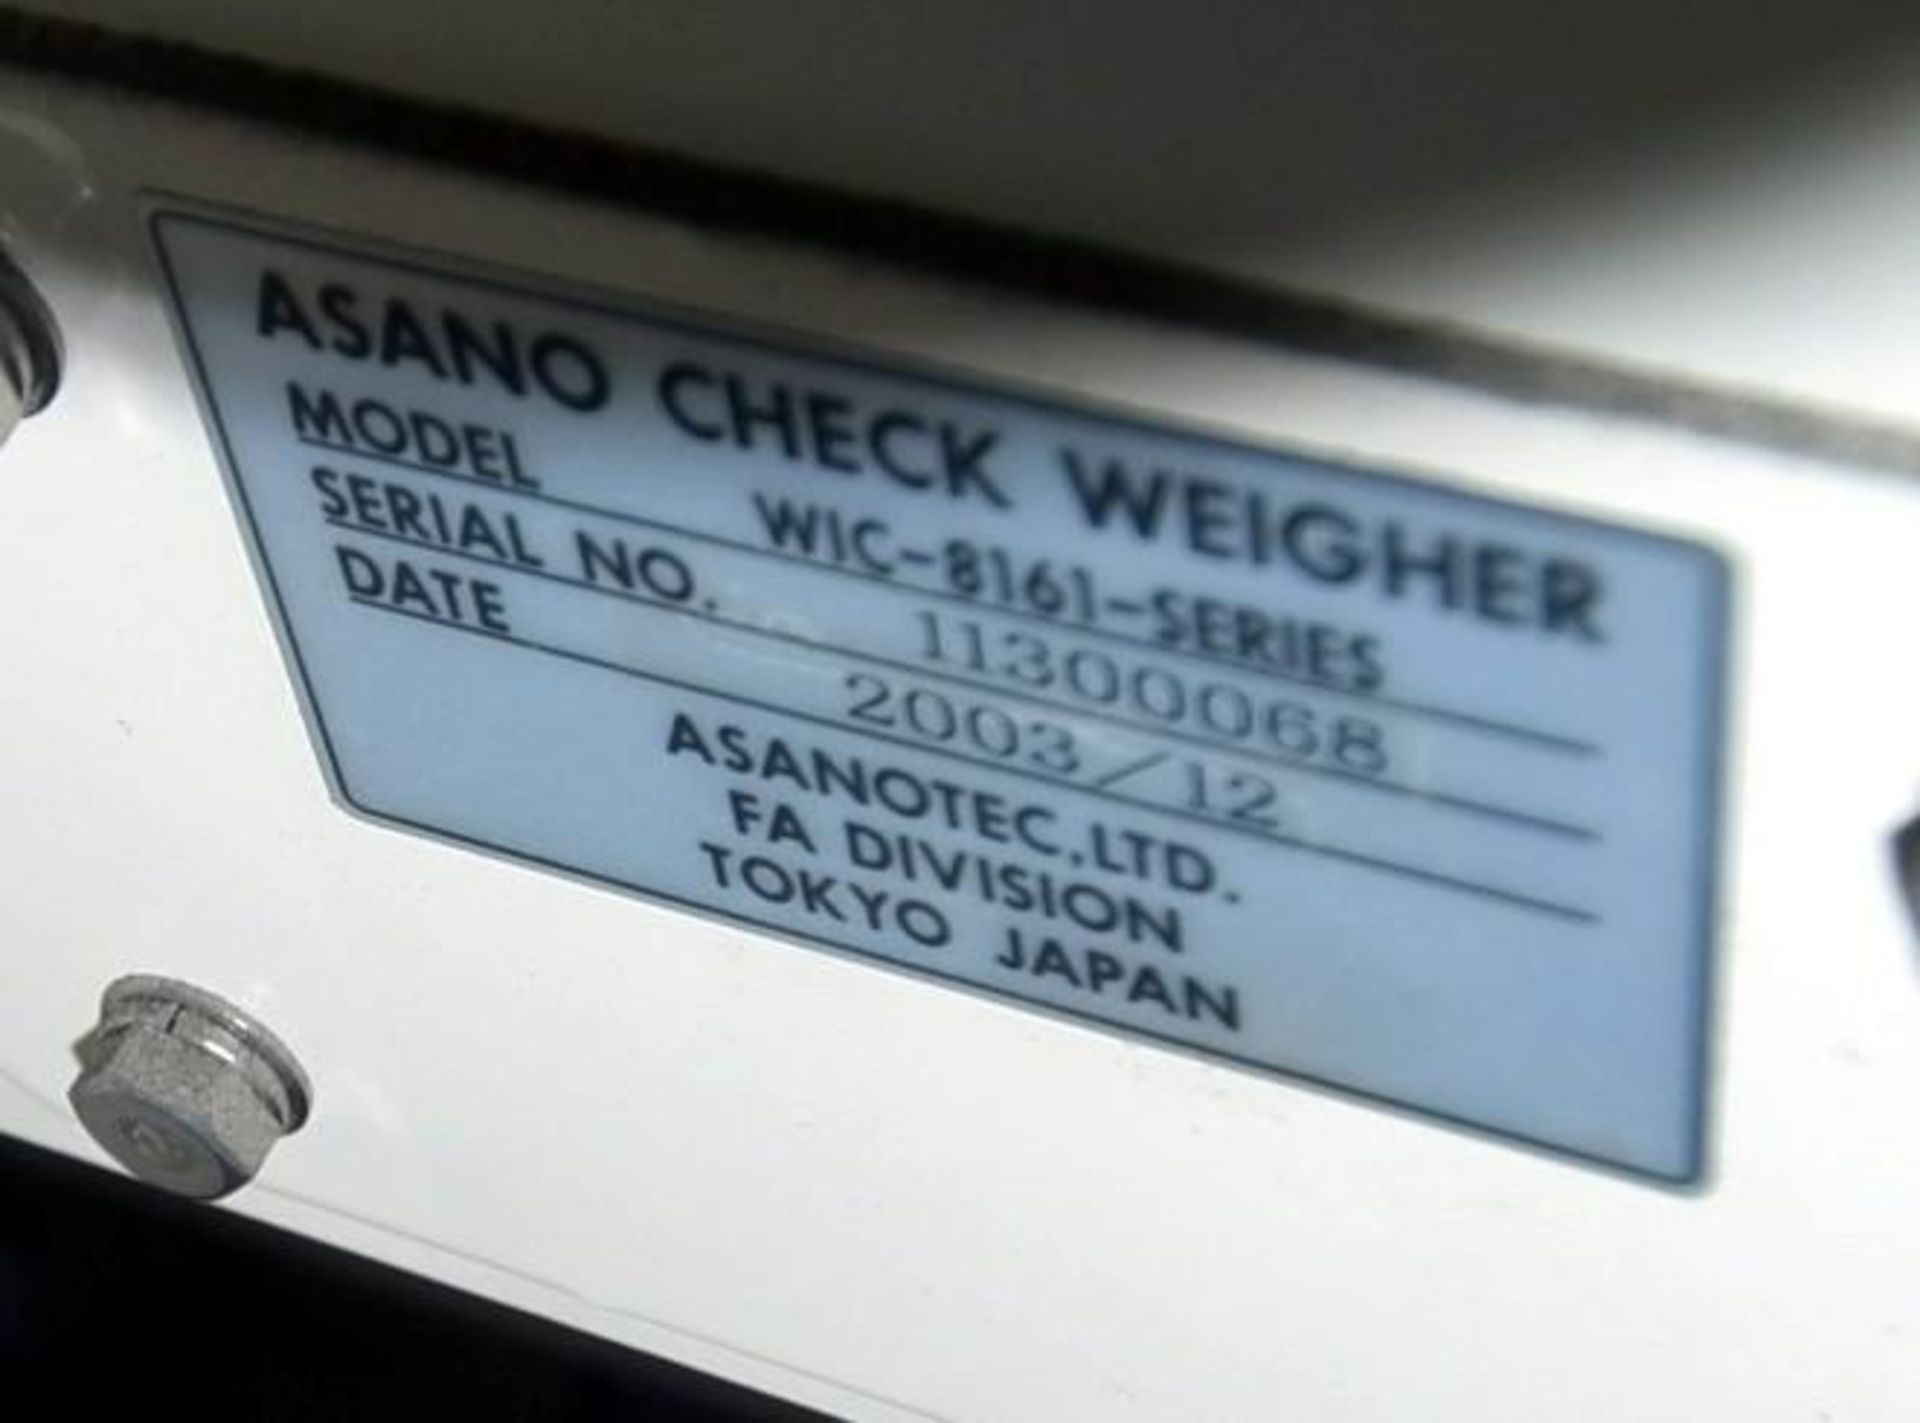 LOT: Asano Check Weigher Series WIC-8161, S/N 11300068 (2003), includes Anser 620 Inkjet Printer - Image 3 of 5